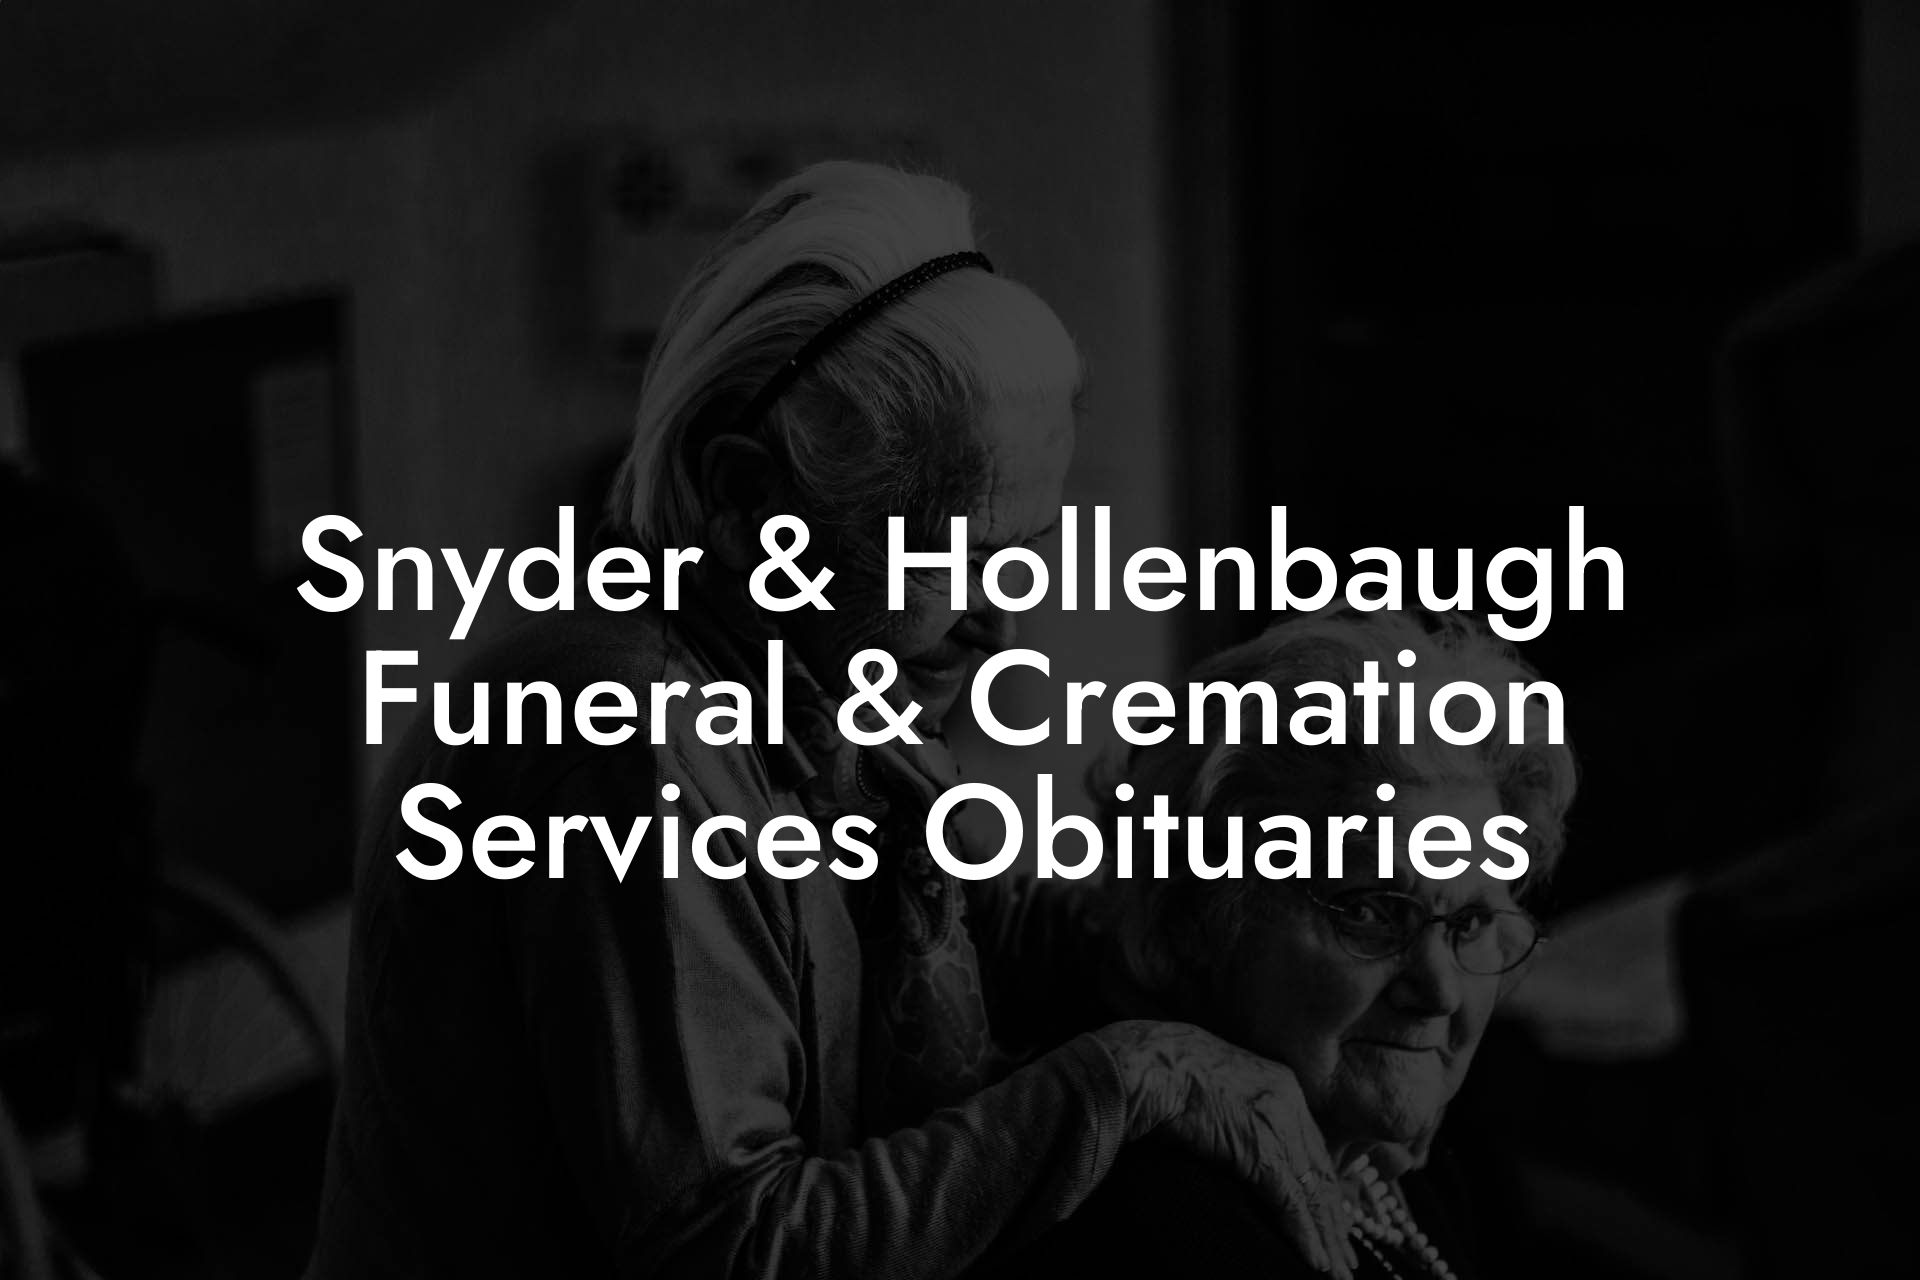 Snyder & Hollenbaugh Funeral & Cremation Services Obituaries - Eulogy ...